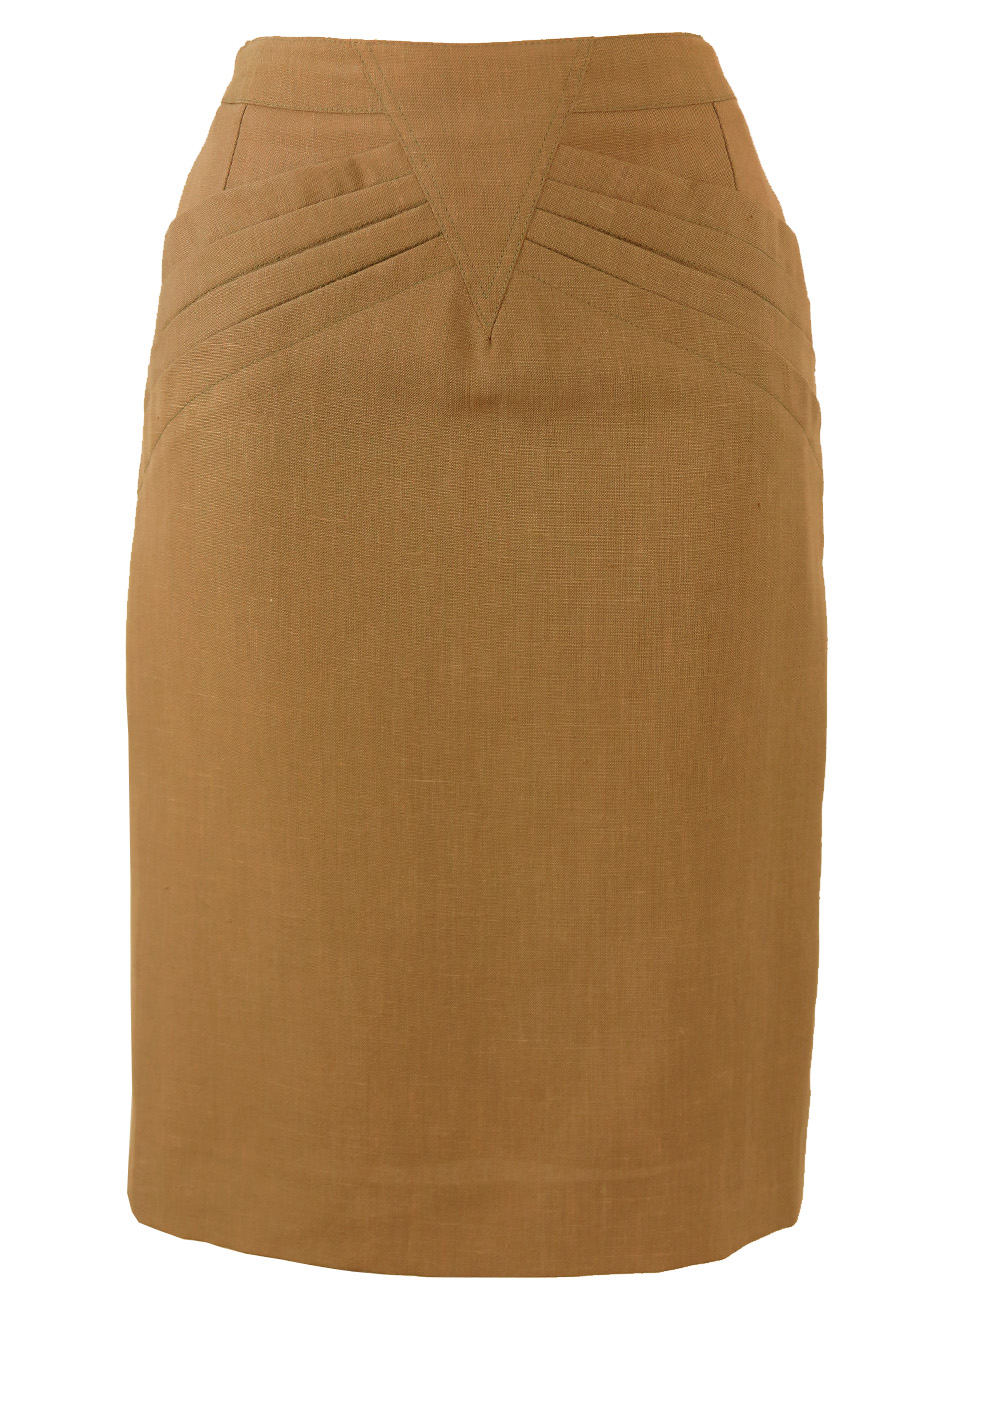 Taupe Knee Length Pencil Skirt with Decorative Waistband - S | Reign ...